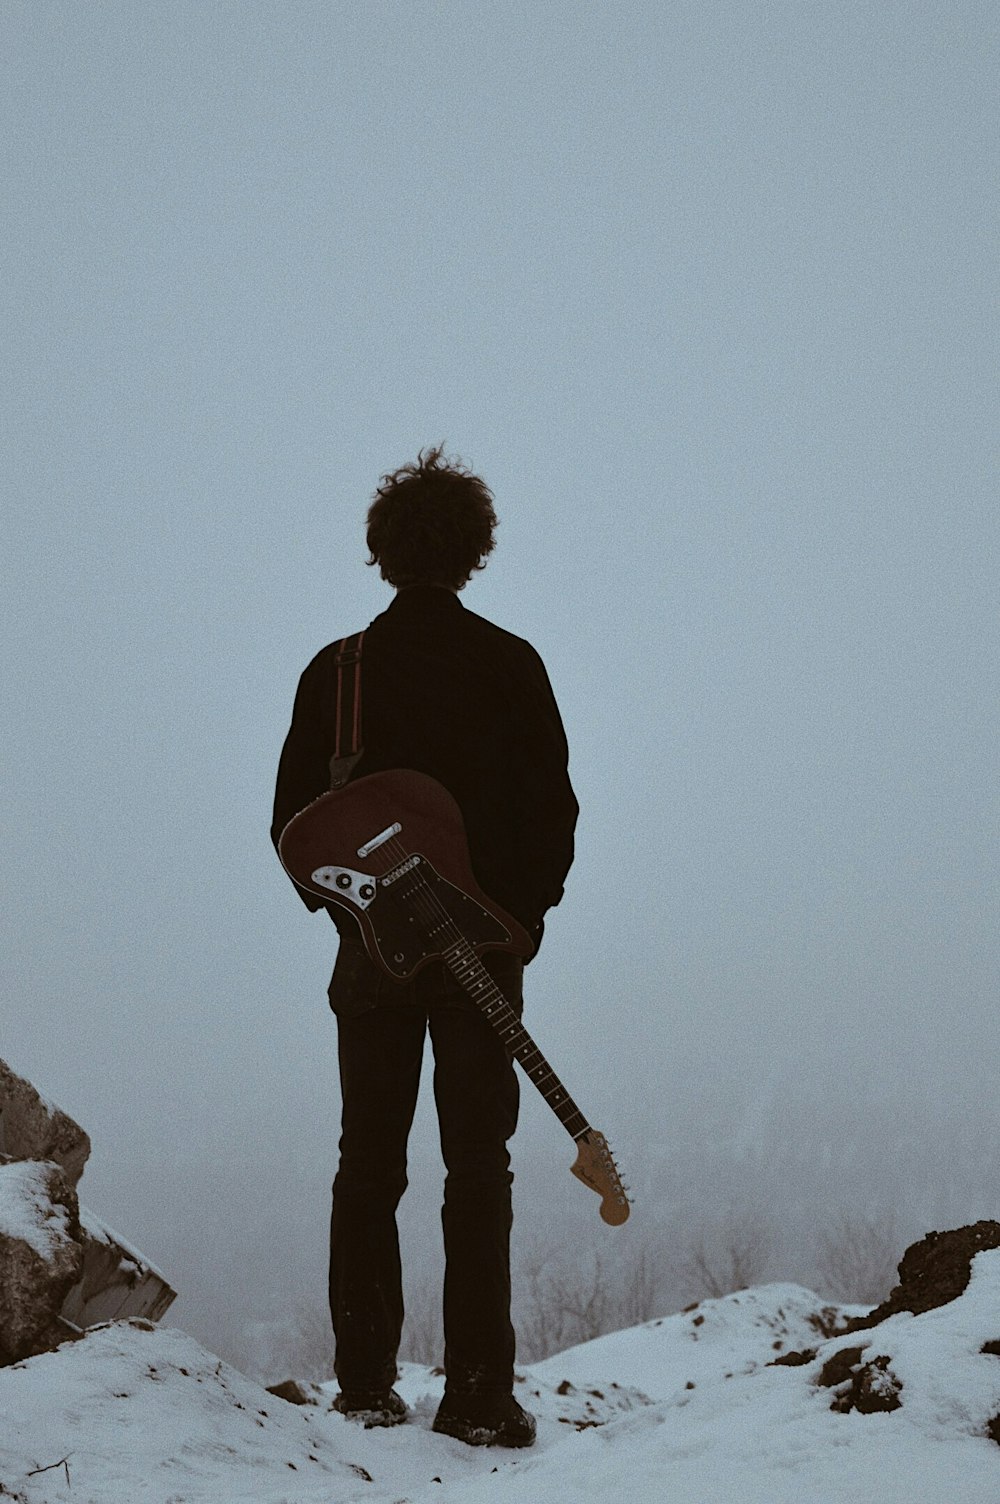 man with guitar on his back standing on cliff